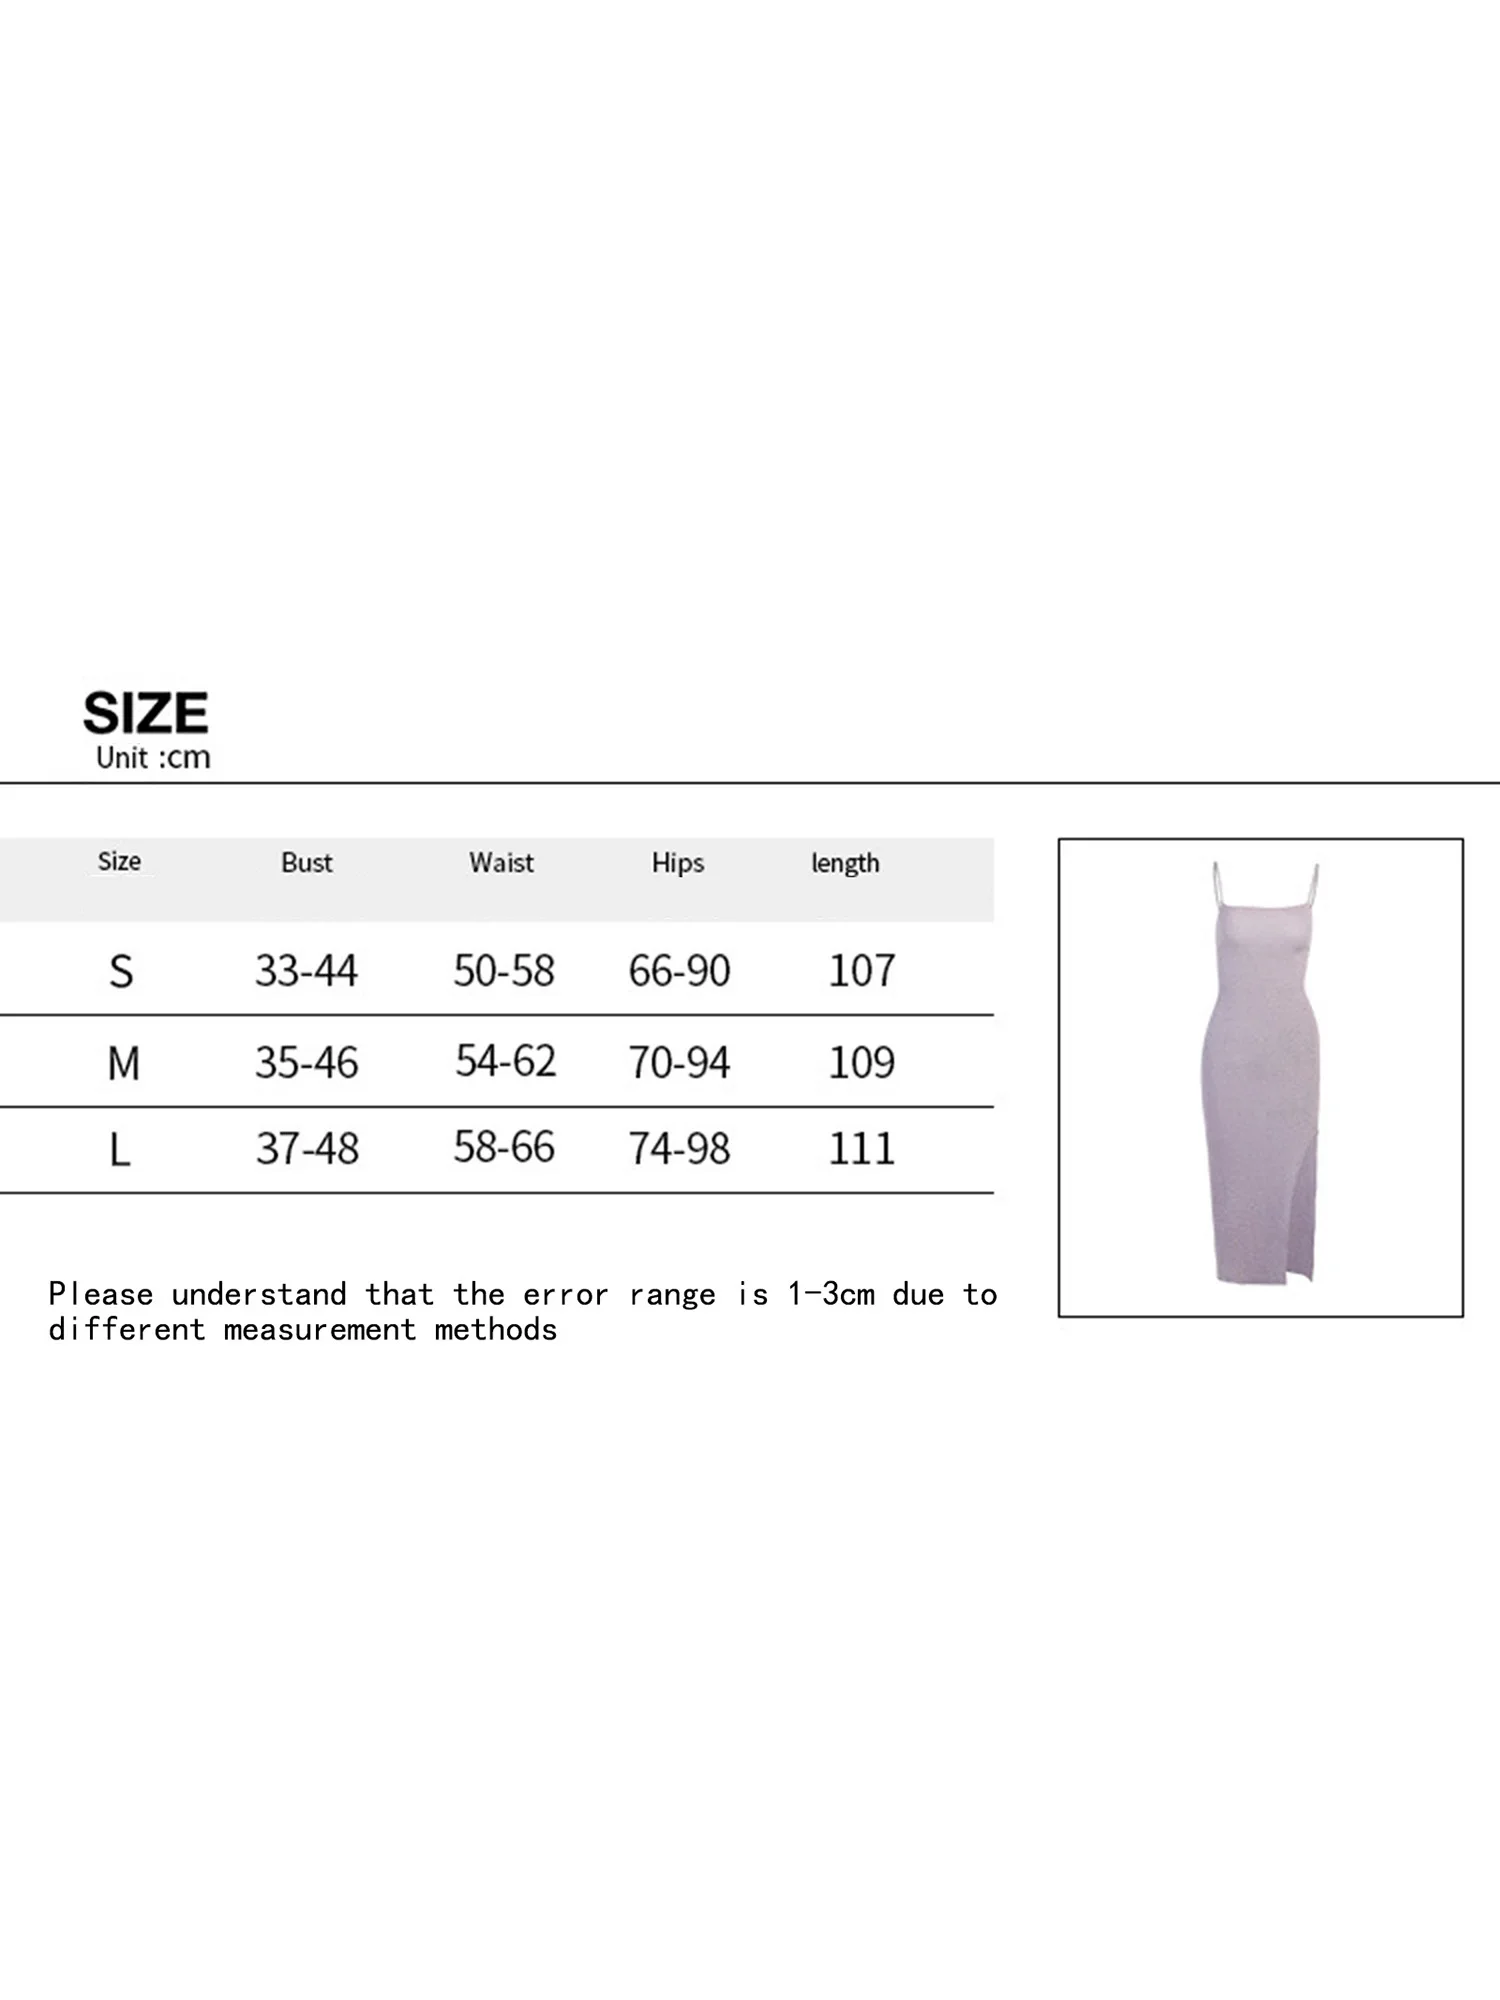 

Elegant Halter Neck with Cut Out Details and Spaghetti Straps for Women - Backless Bodycon Slim Dress Perfect for